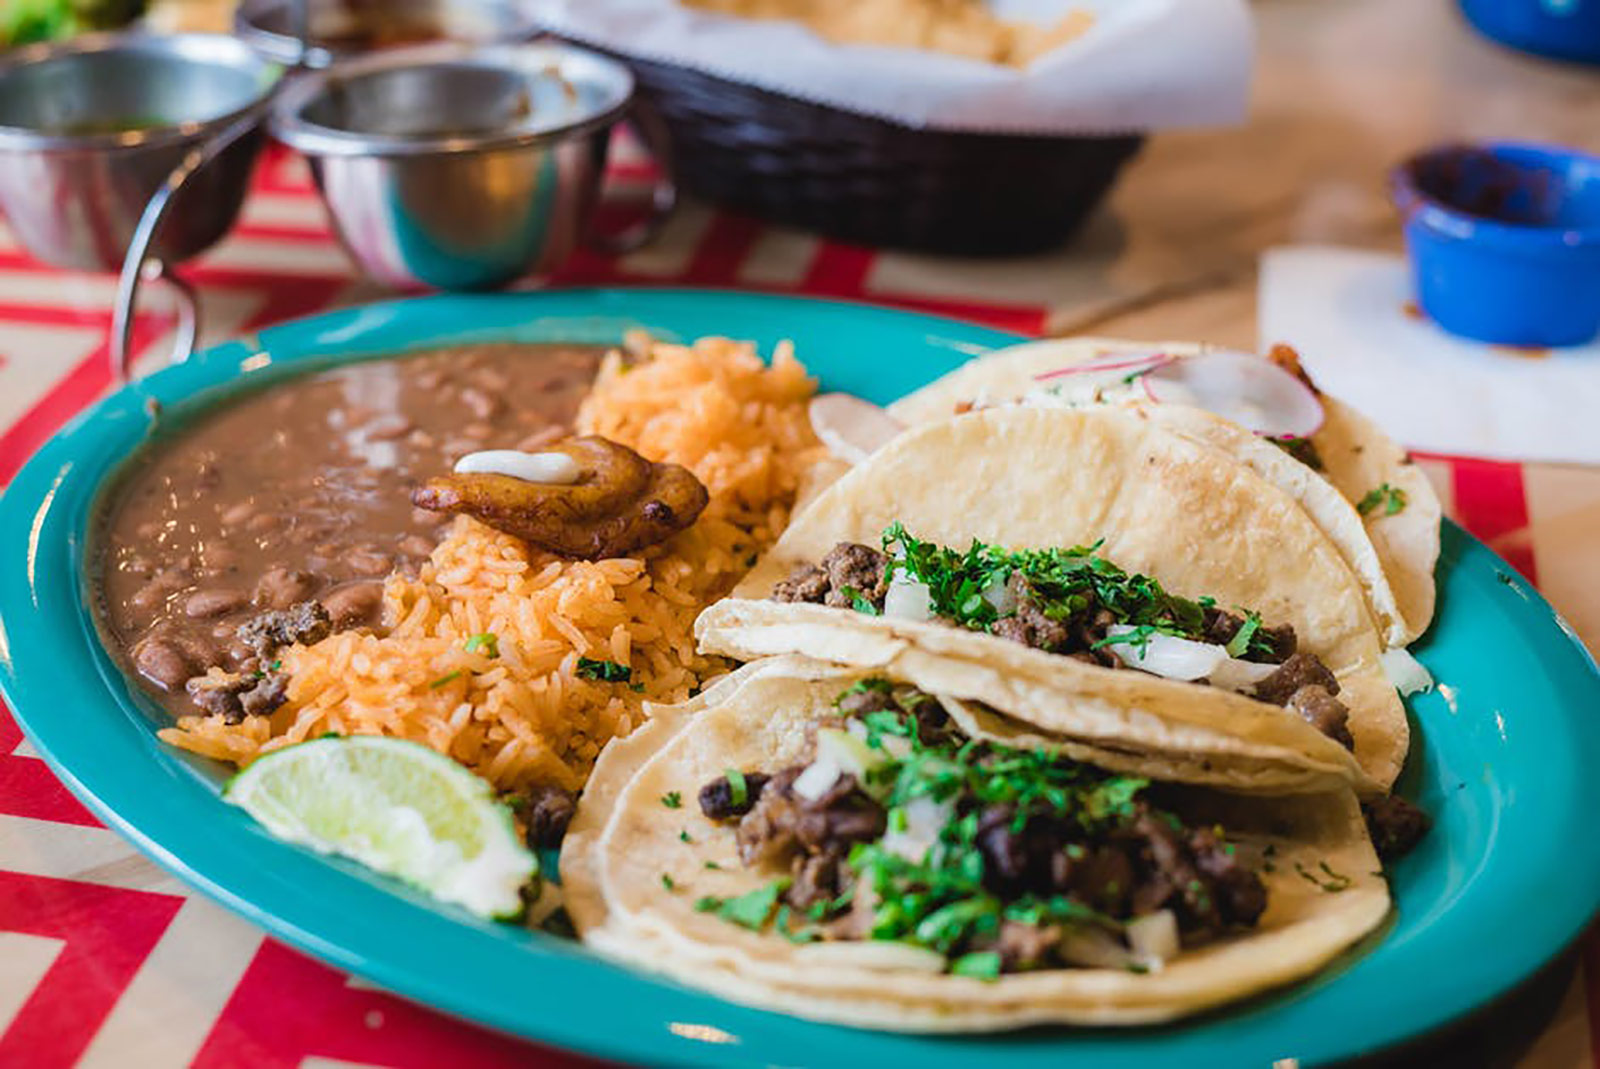 Best Mexican Dishes: 27 Most Popular Mexican Foods